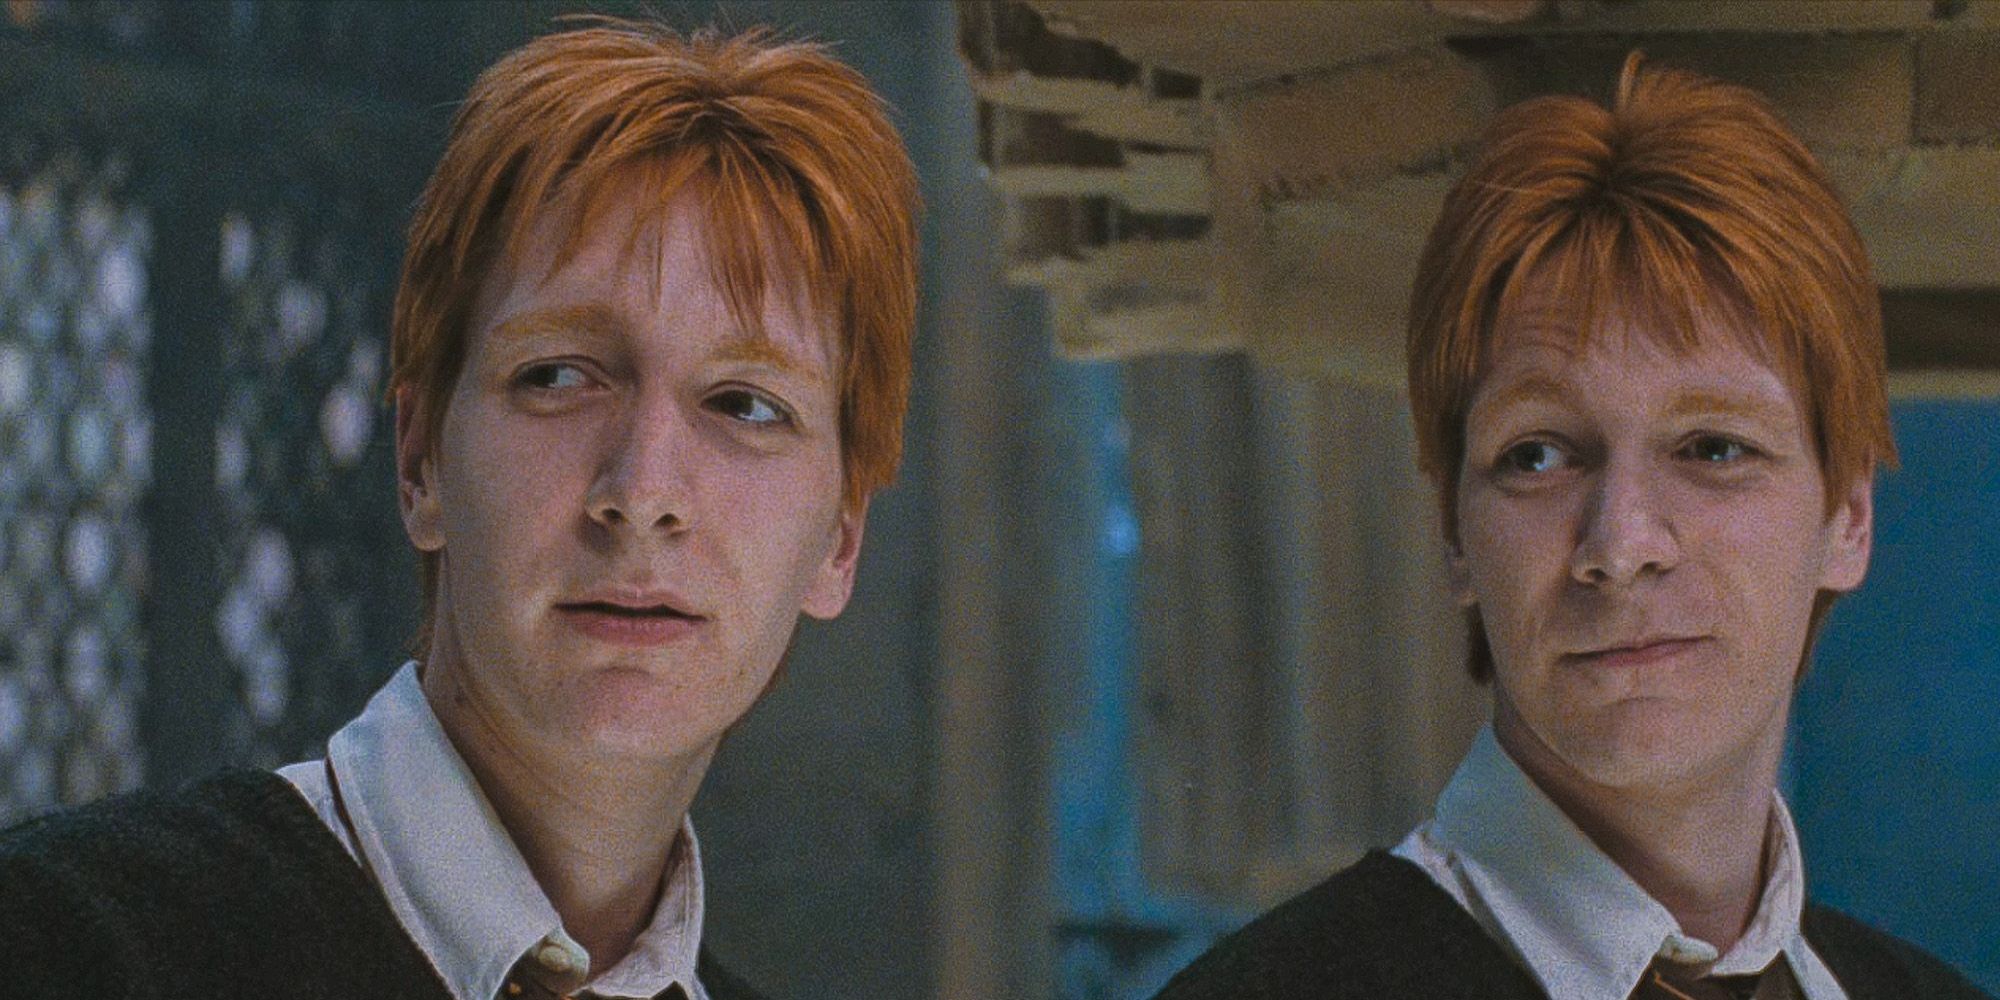 Fred and George Weasley from the Harry Potter movie franchise.